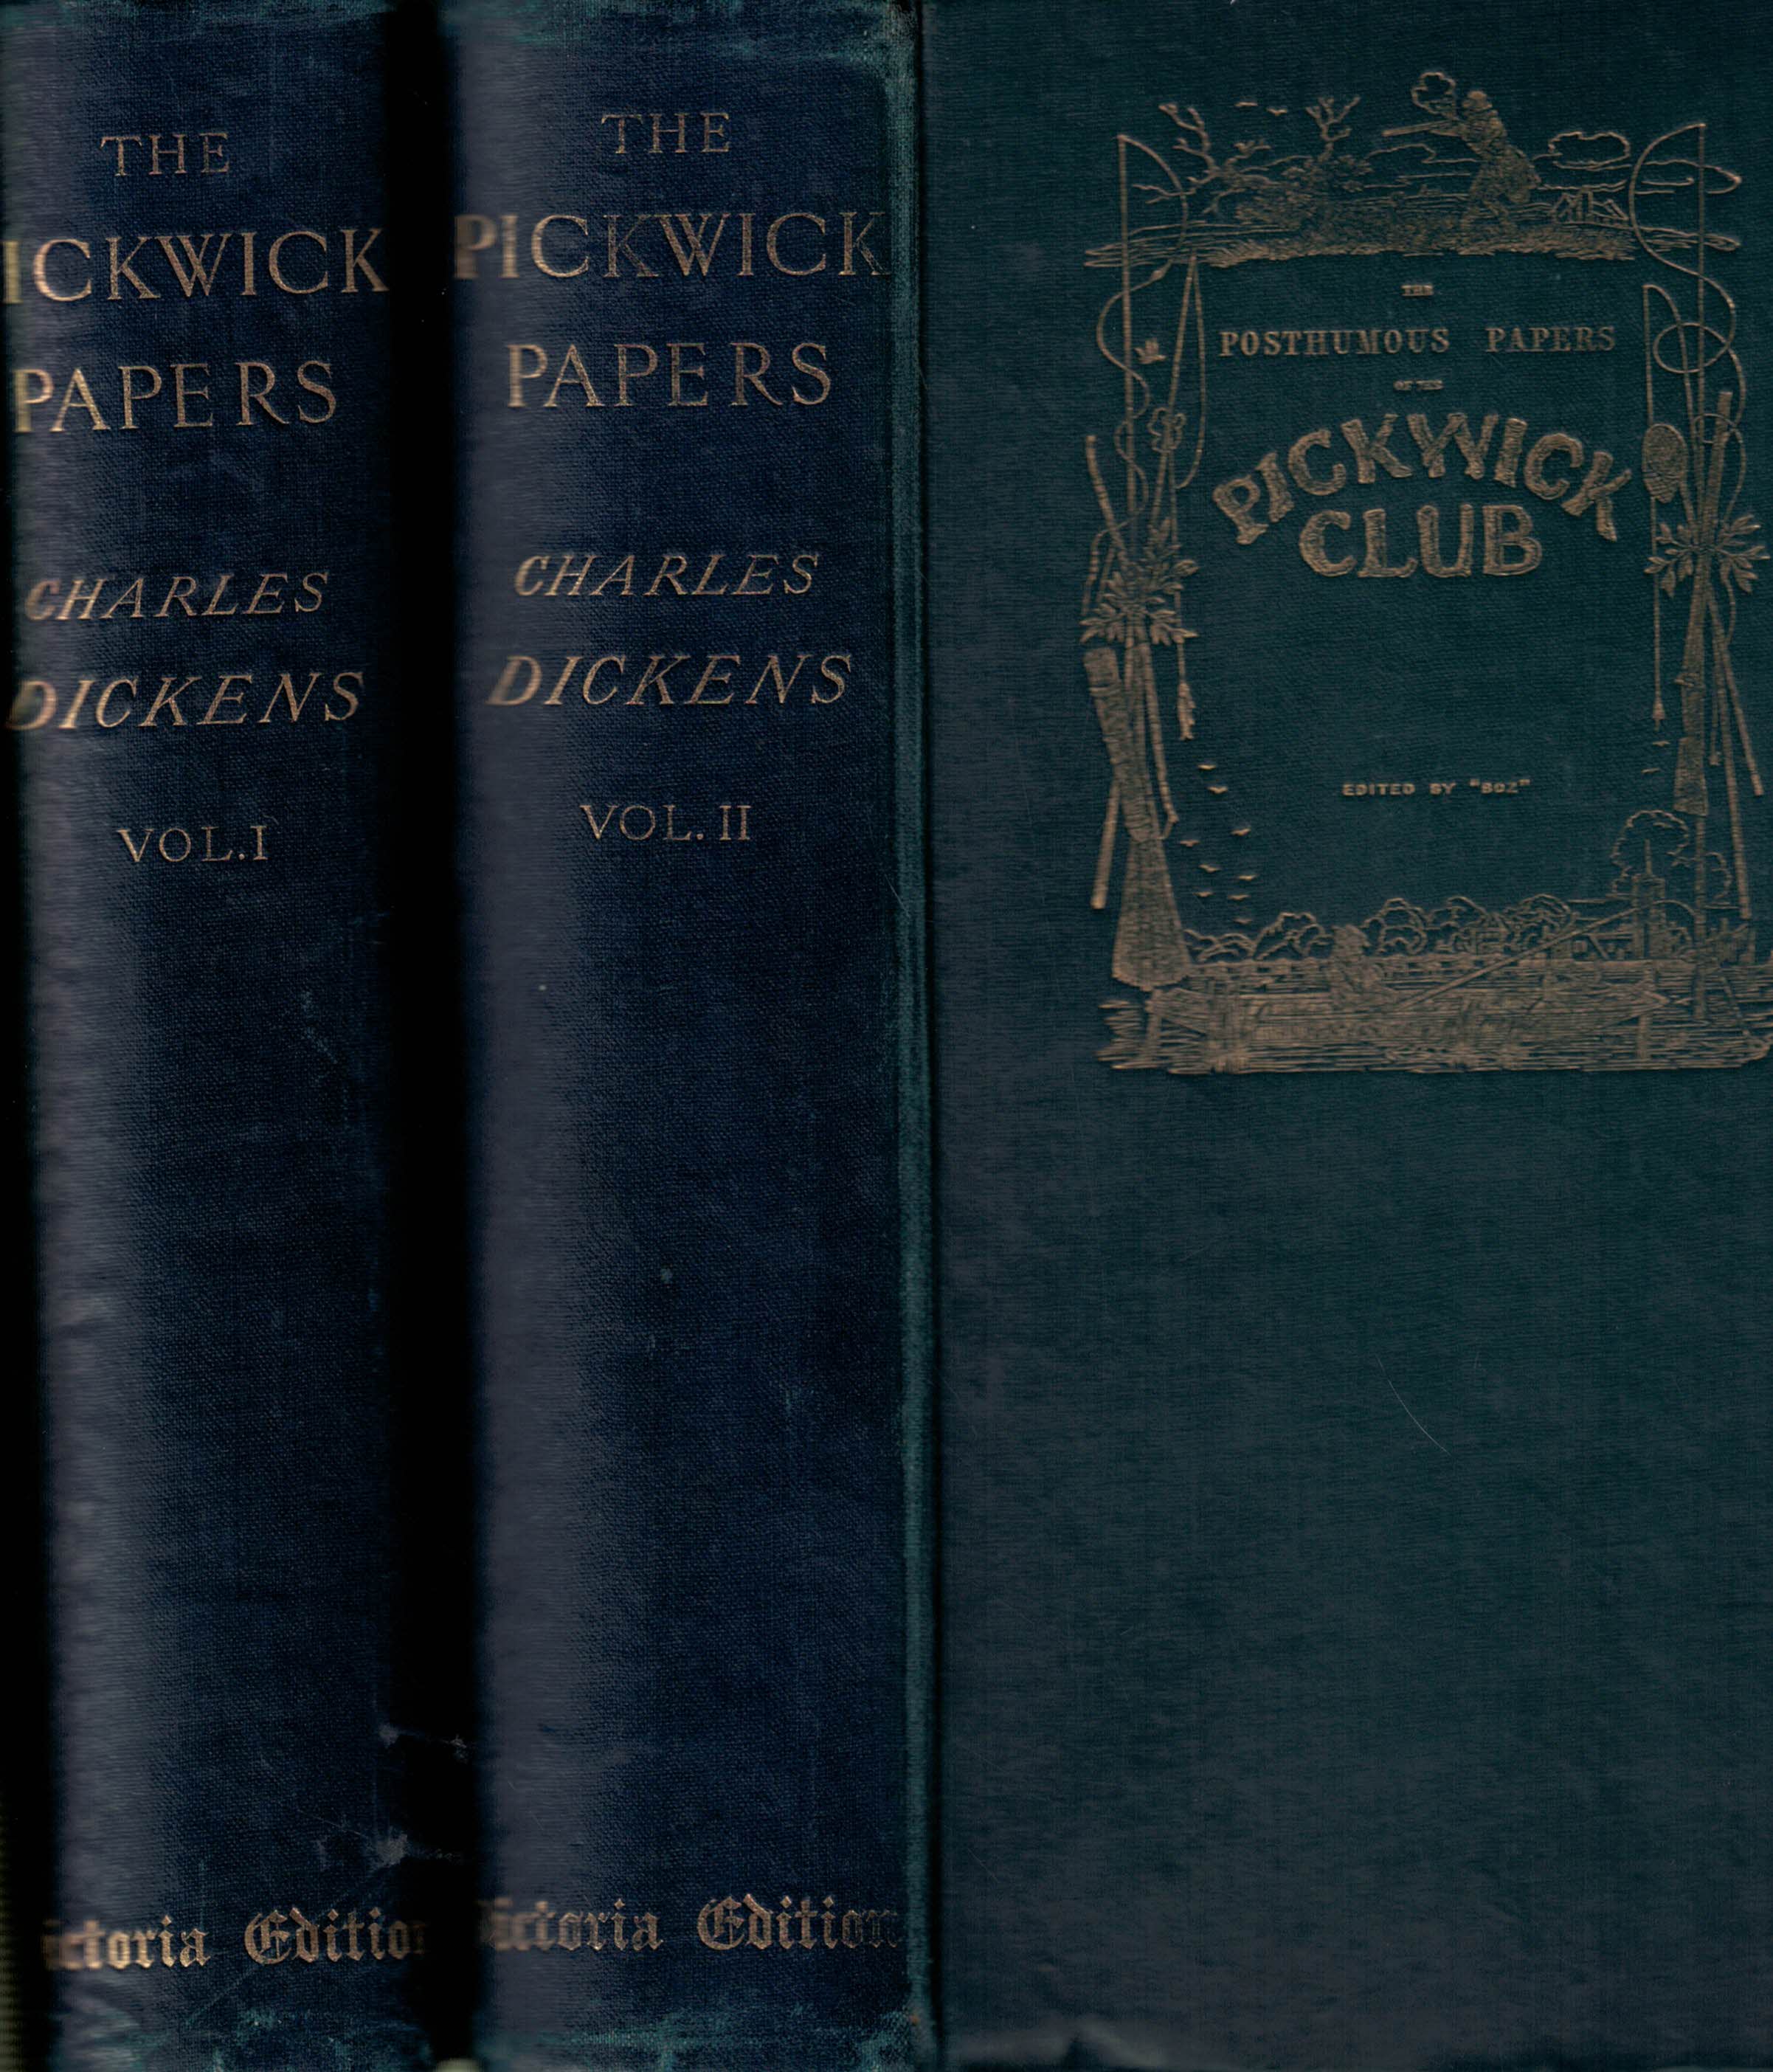 The Posthumous Papers of the Pickwick Club. Chapman Victoria edition. 2 volume set. 1887.